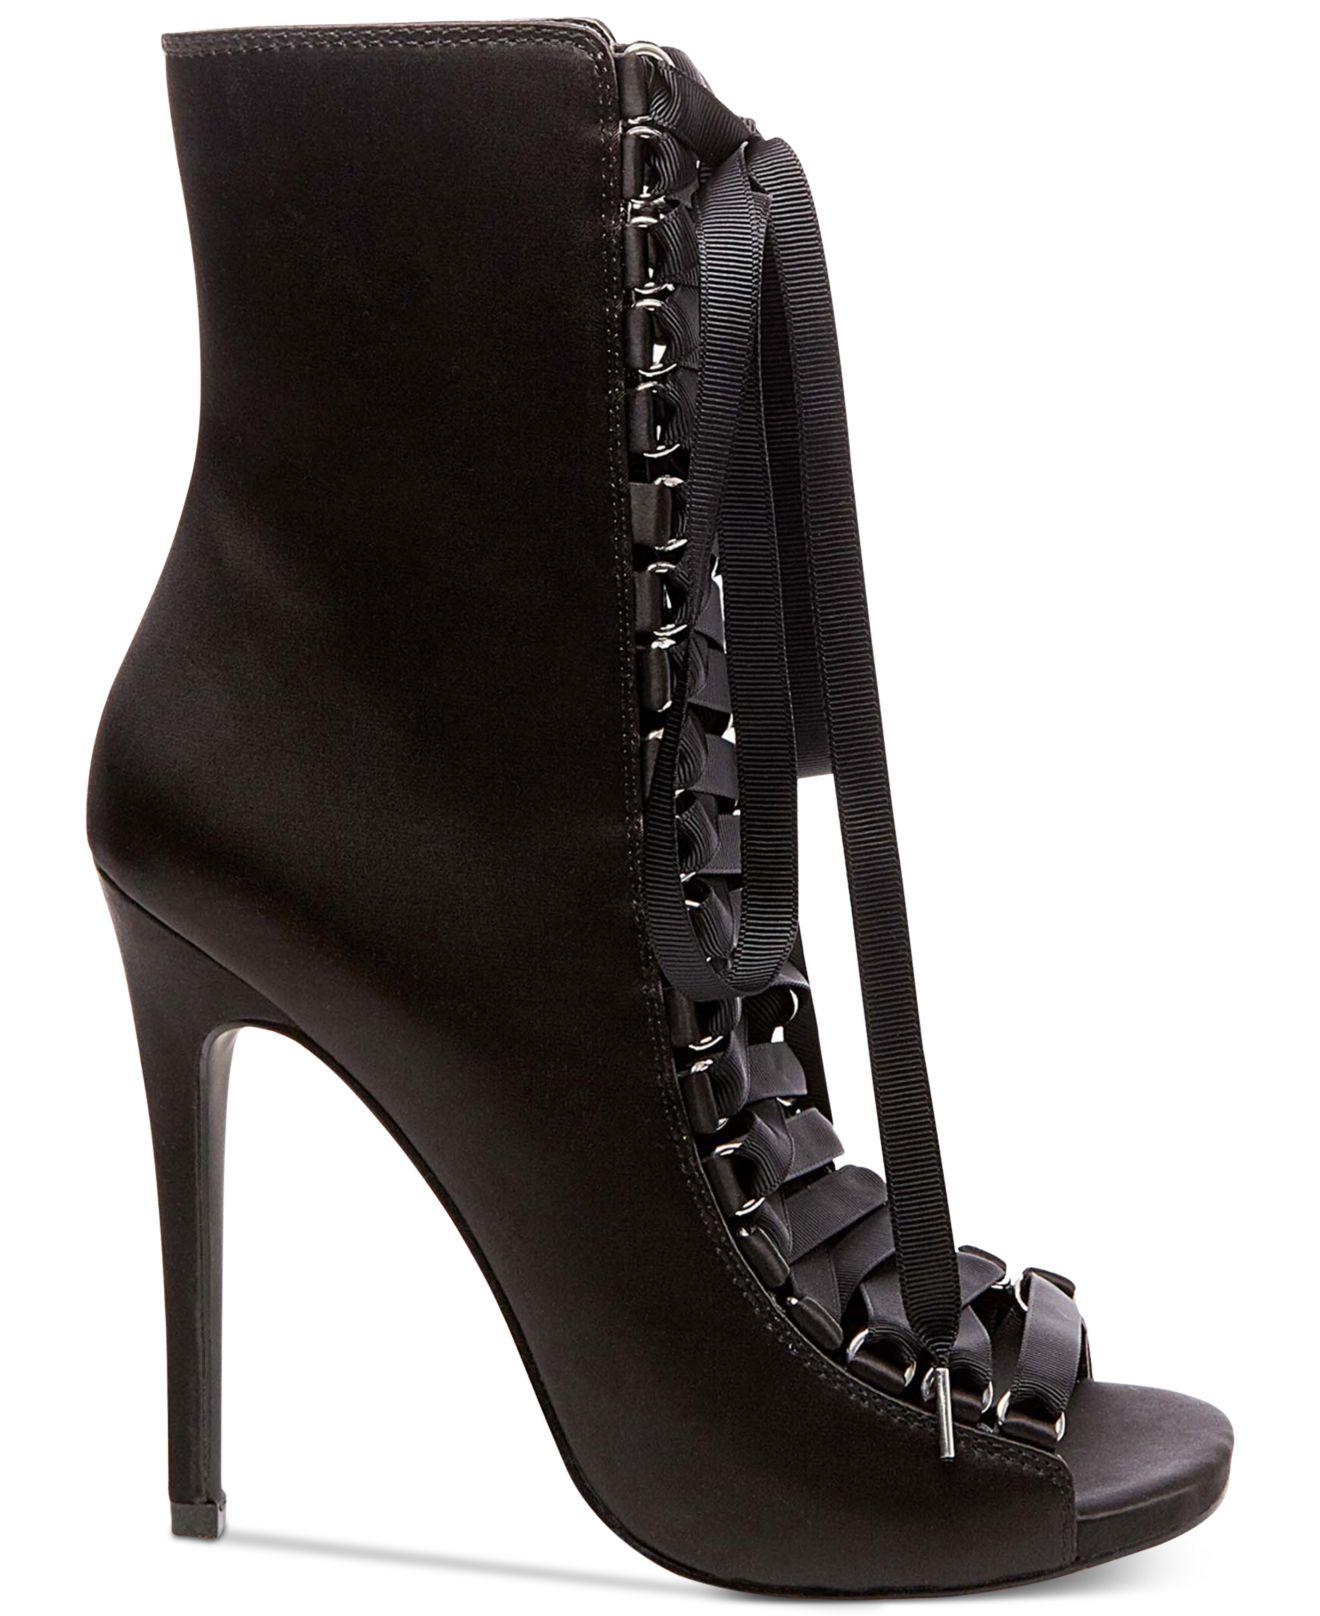 Steve Madden Fuego Lace-up Peep-toe Booties in Black | Lyst